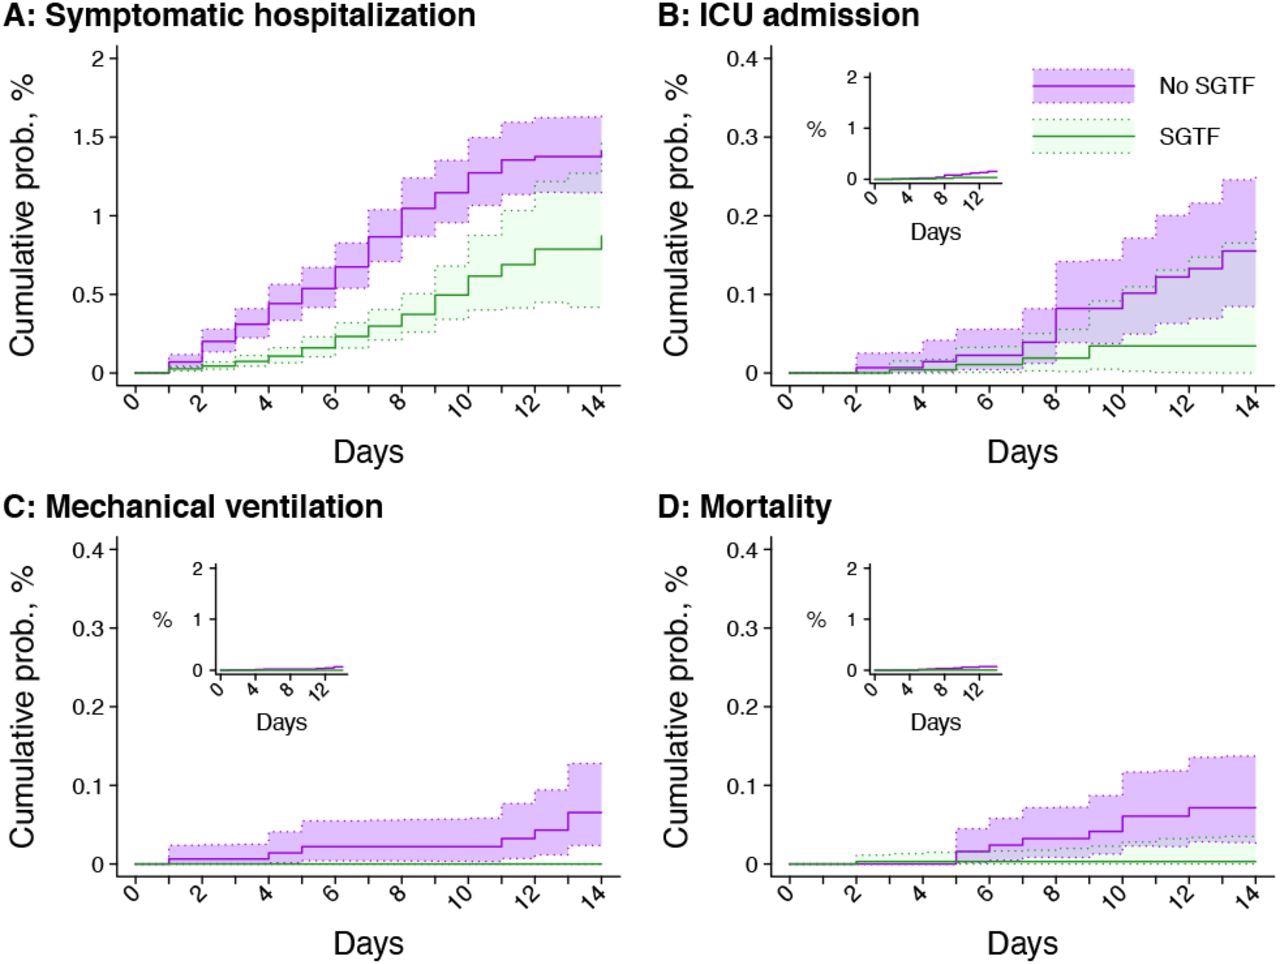 Times to severe outcomes in cases with SGTF and non-SGTF infections were first detected in outpatient settings.  The panel includes (a) symptomatic hospital admission;  (b) ICU admission;  (c) initiation of mechanical ventilation;  and (d) mortality.  The inset plots within each panel show the cumulative probabilities on the same y-axis scale as in panel A.  The shaded areas indicate the 95% confidence interval.  Green and purple correspond to detection with and without SGTF (interpreted as a proxy for SARS-CoV-2 Omicron type infection), respectively.